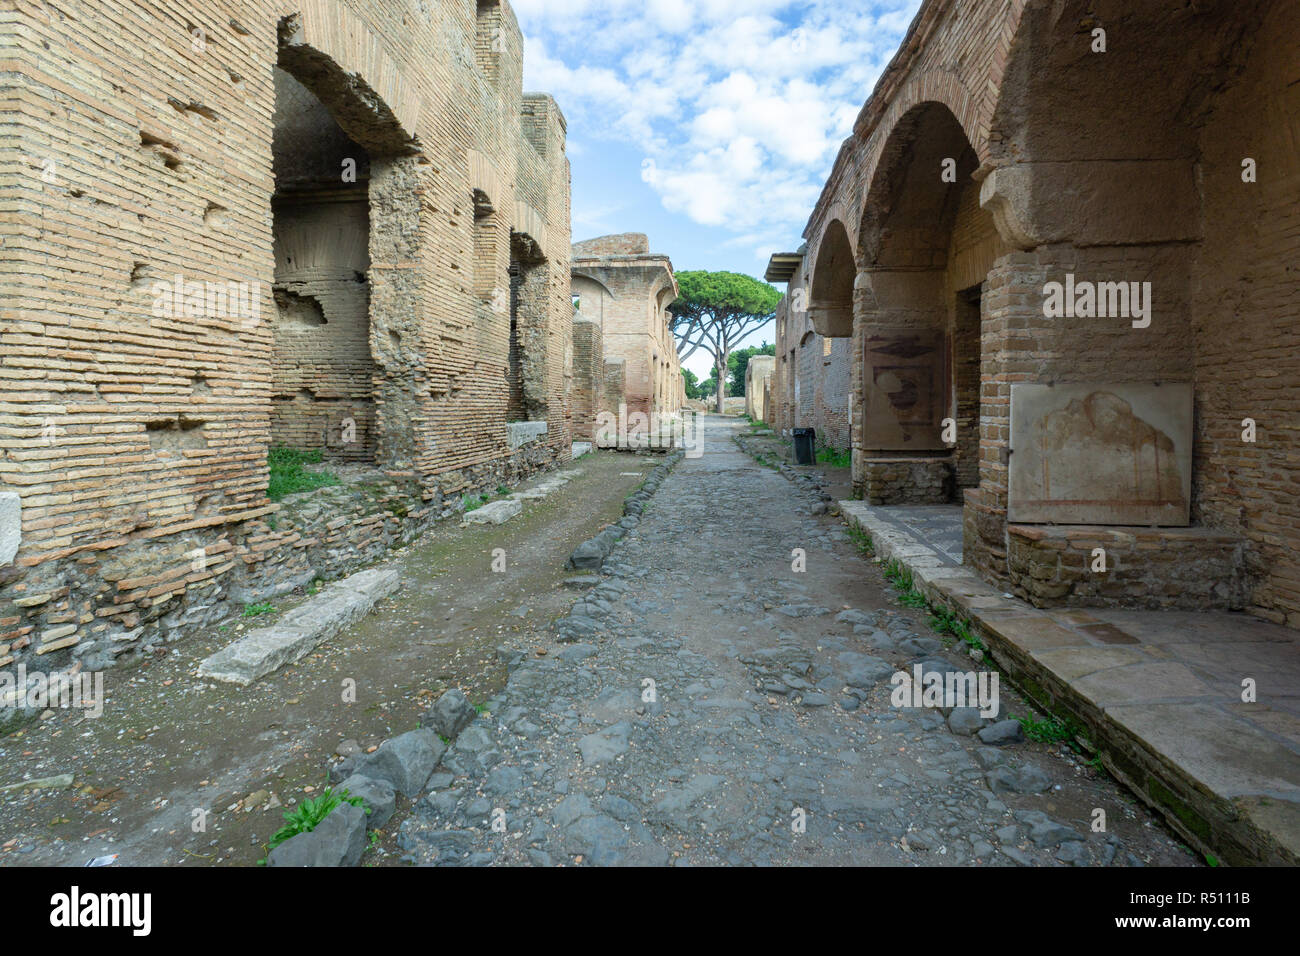 Ostia antica in Rome, Italy. Archaeological Roman empire street view with original ancient Roman buildings Stock Photo